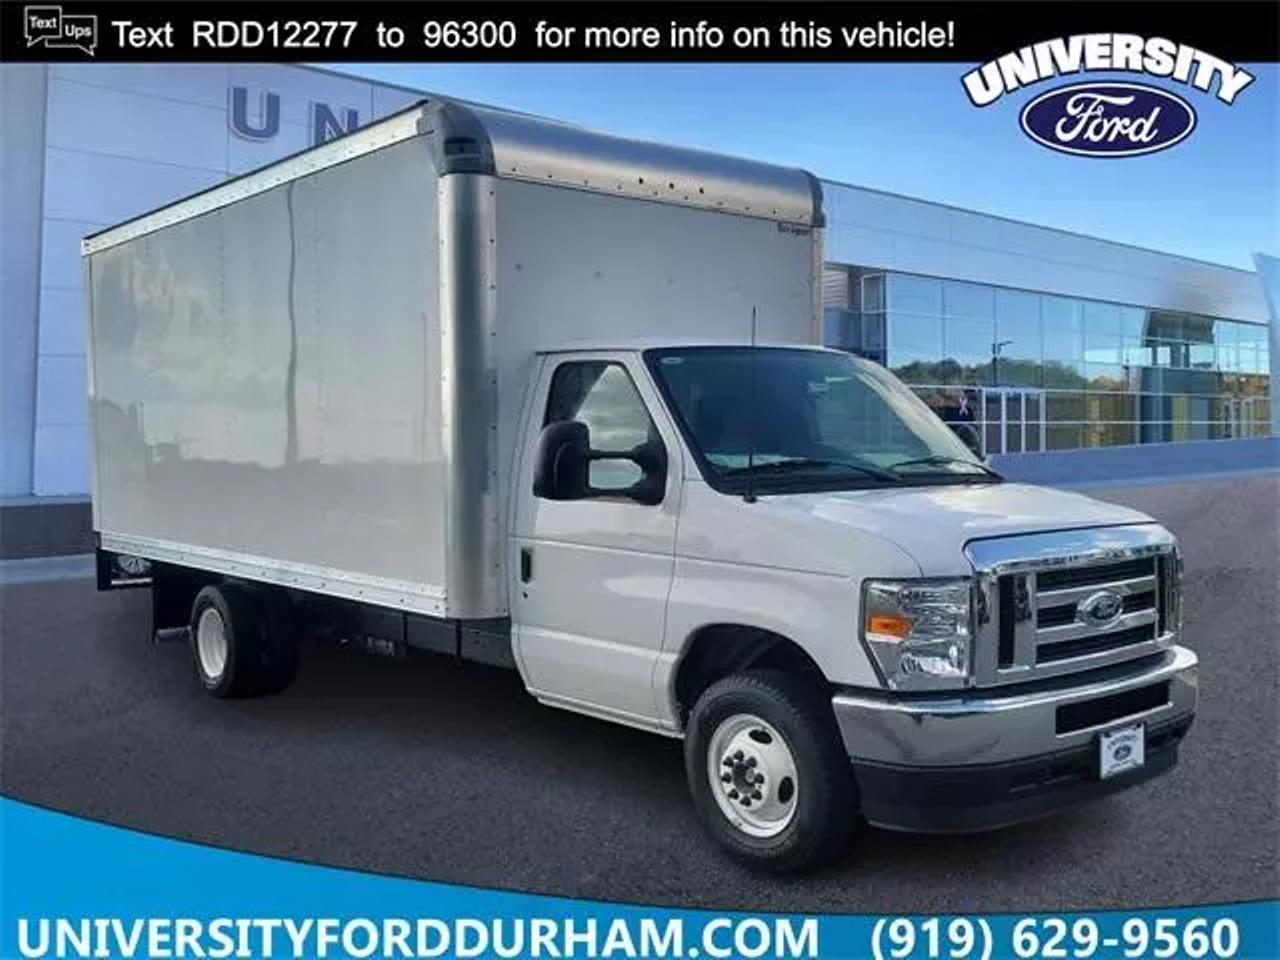 2024 Ford F350 Super Duty Review, Trims, Specs, Price, New Interior